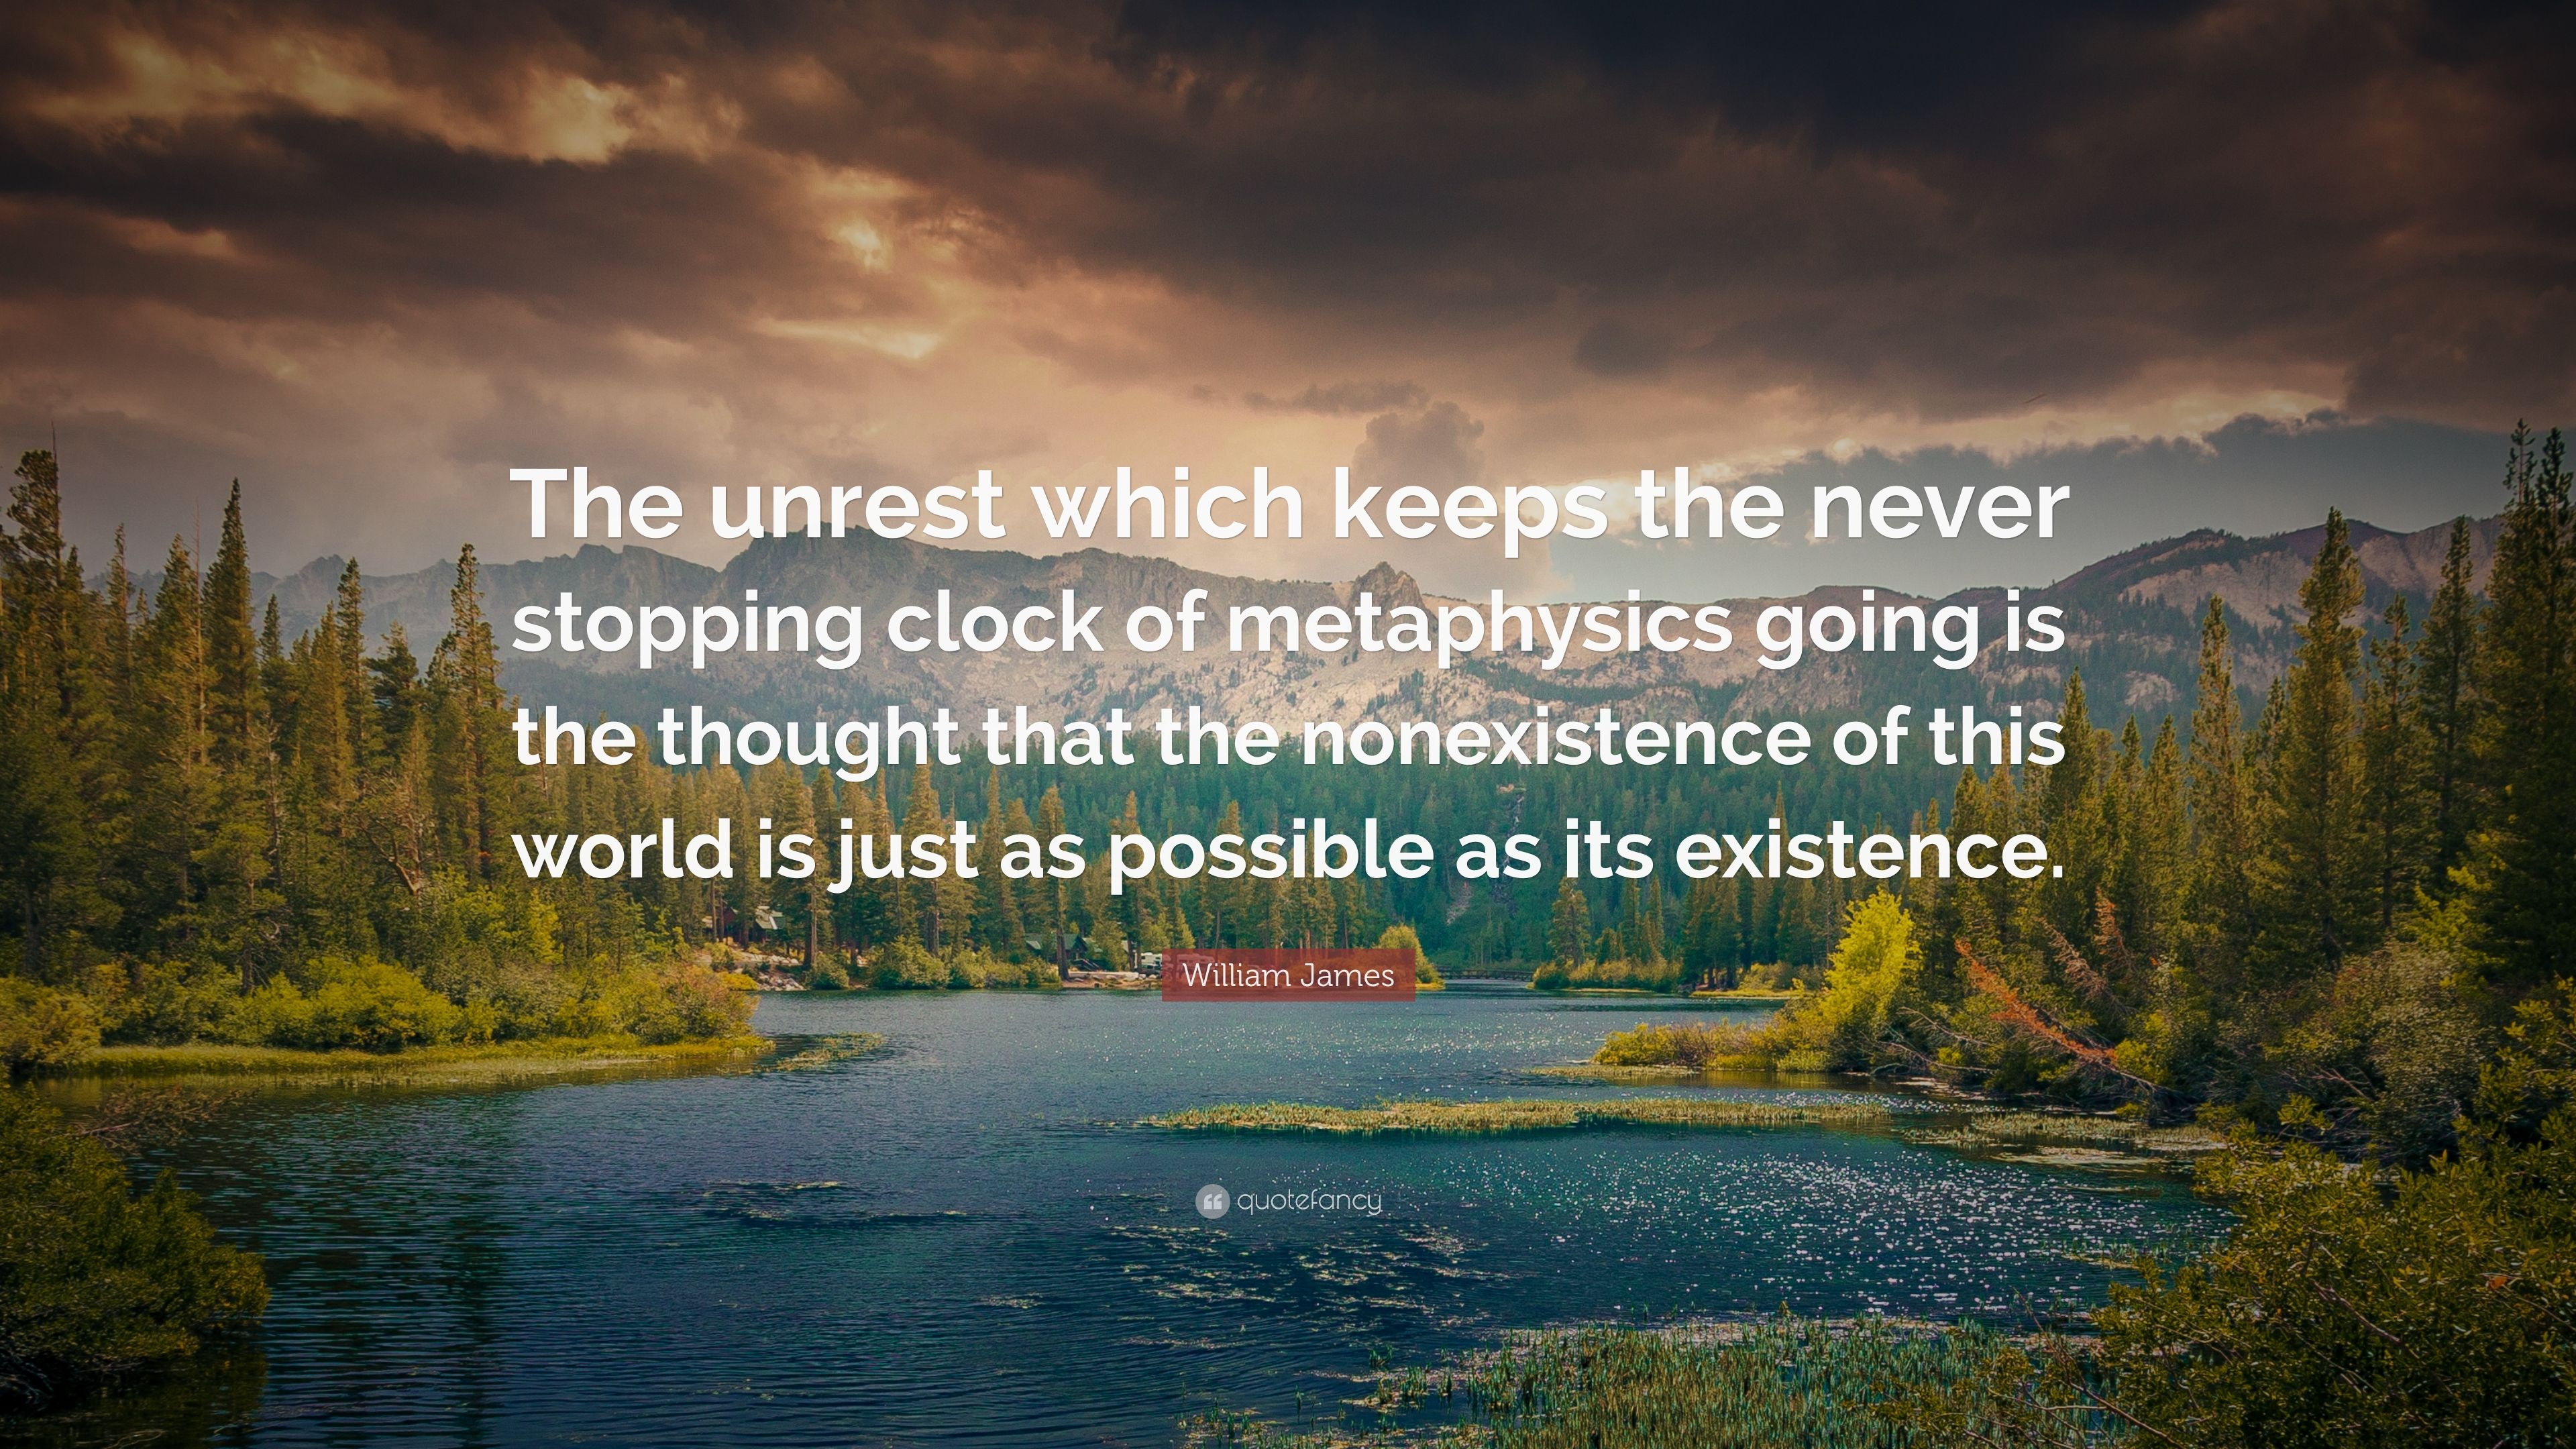 William James Quote: “The unrest which keeps the never stopping ...